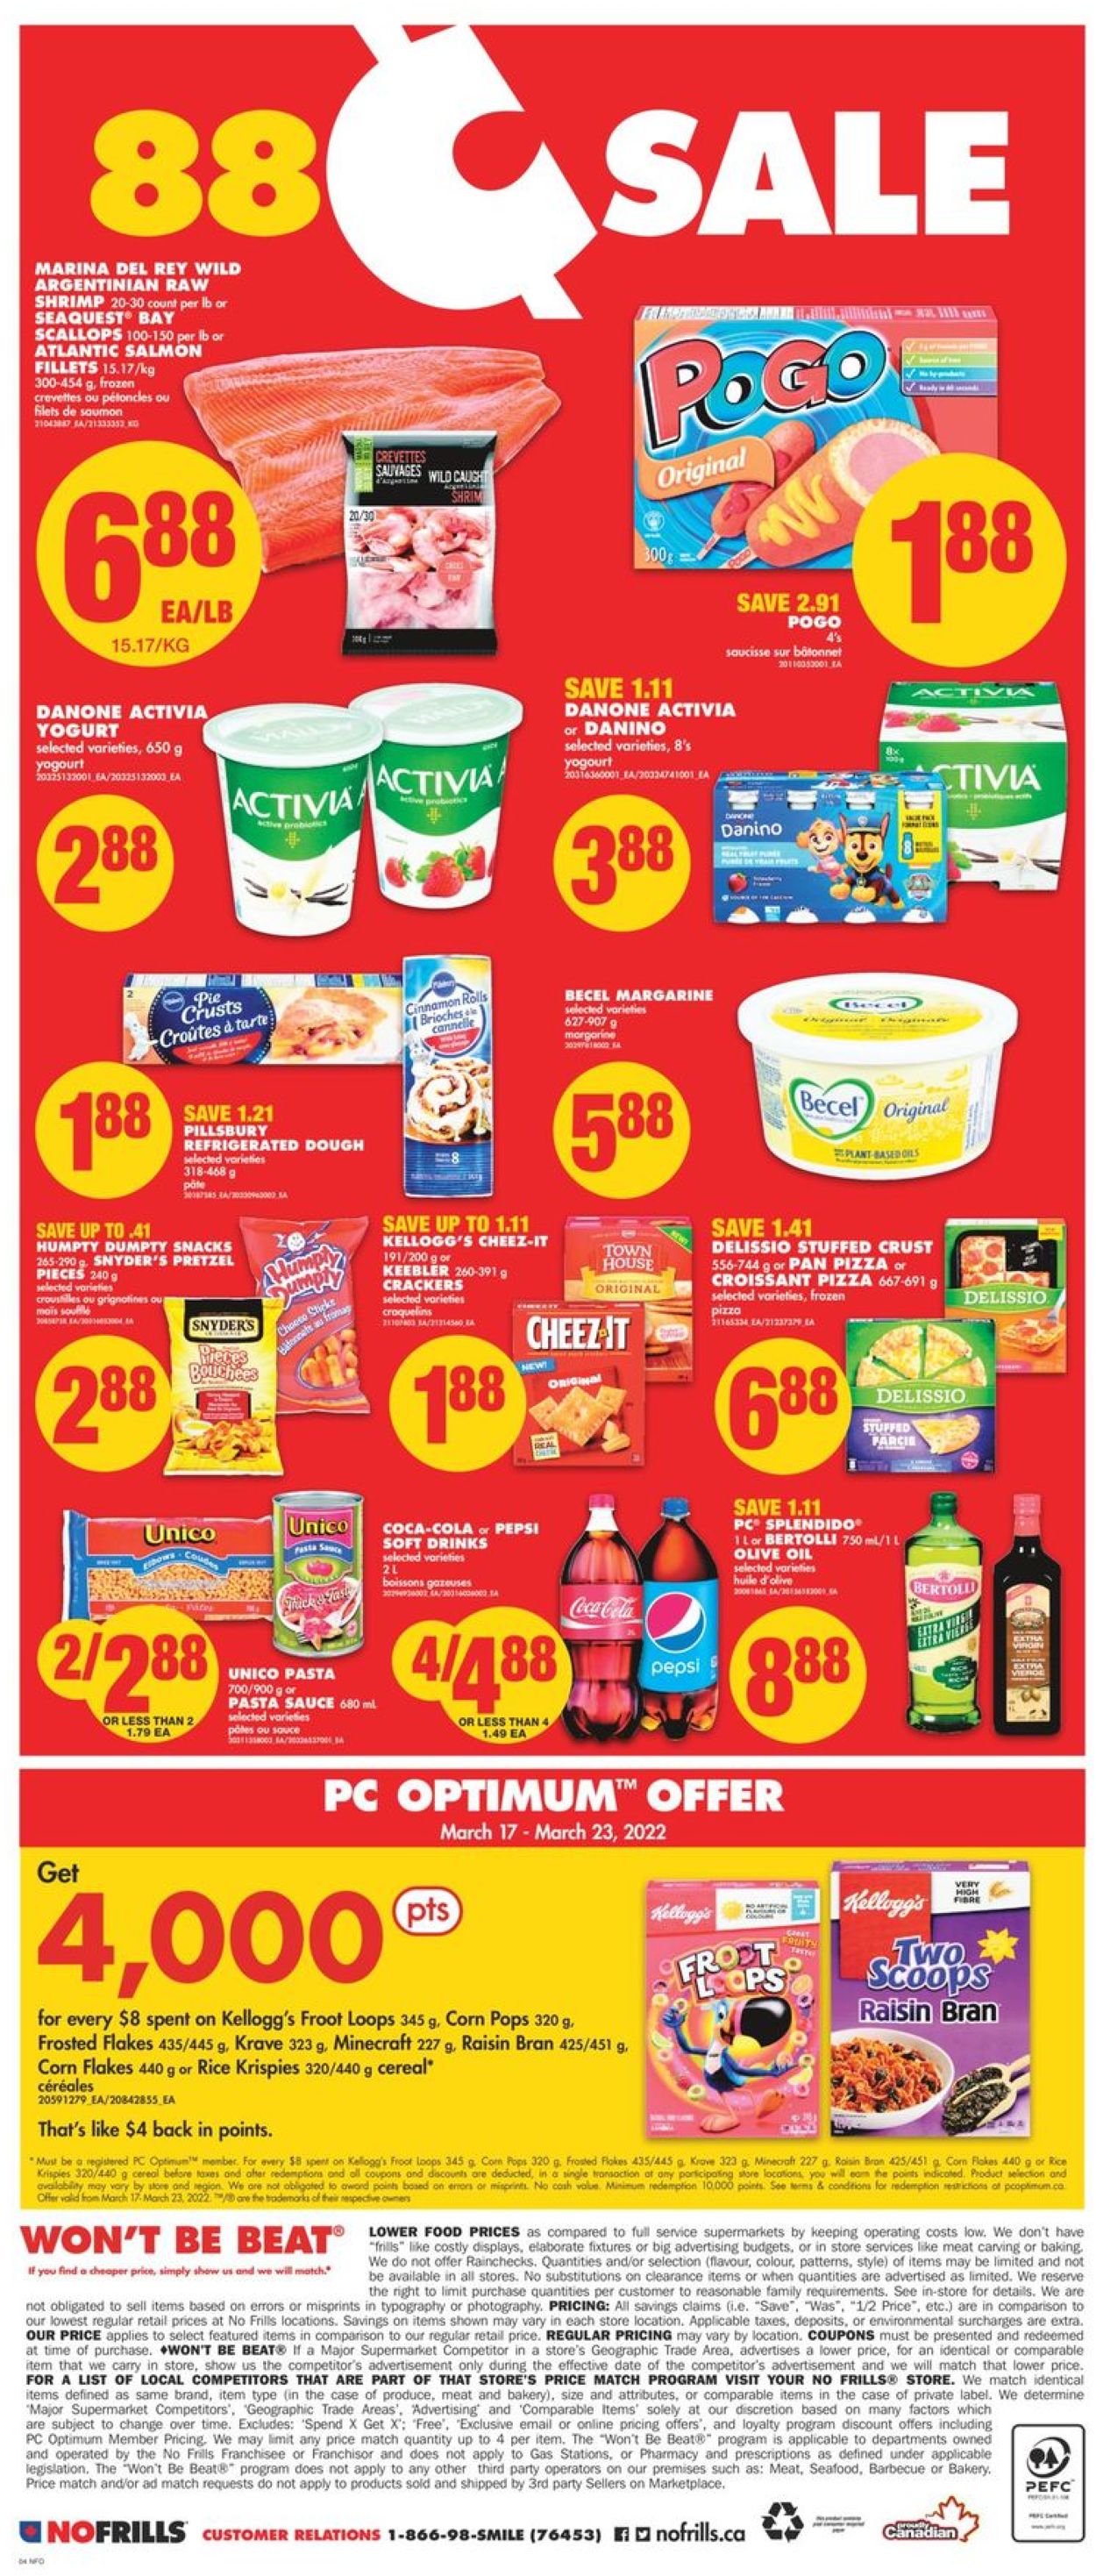 No Frills Flyer from 03/17/2022